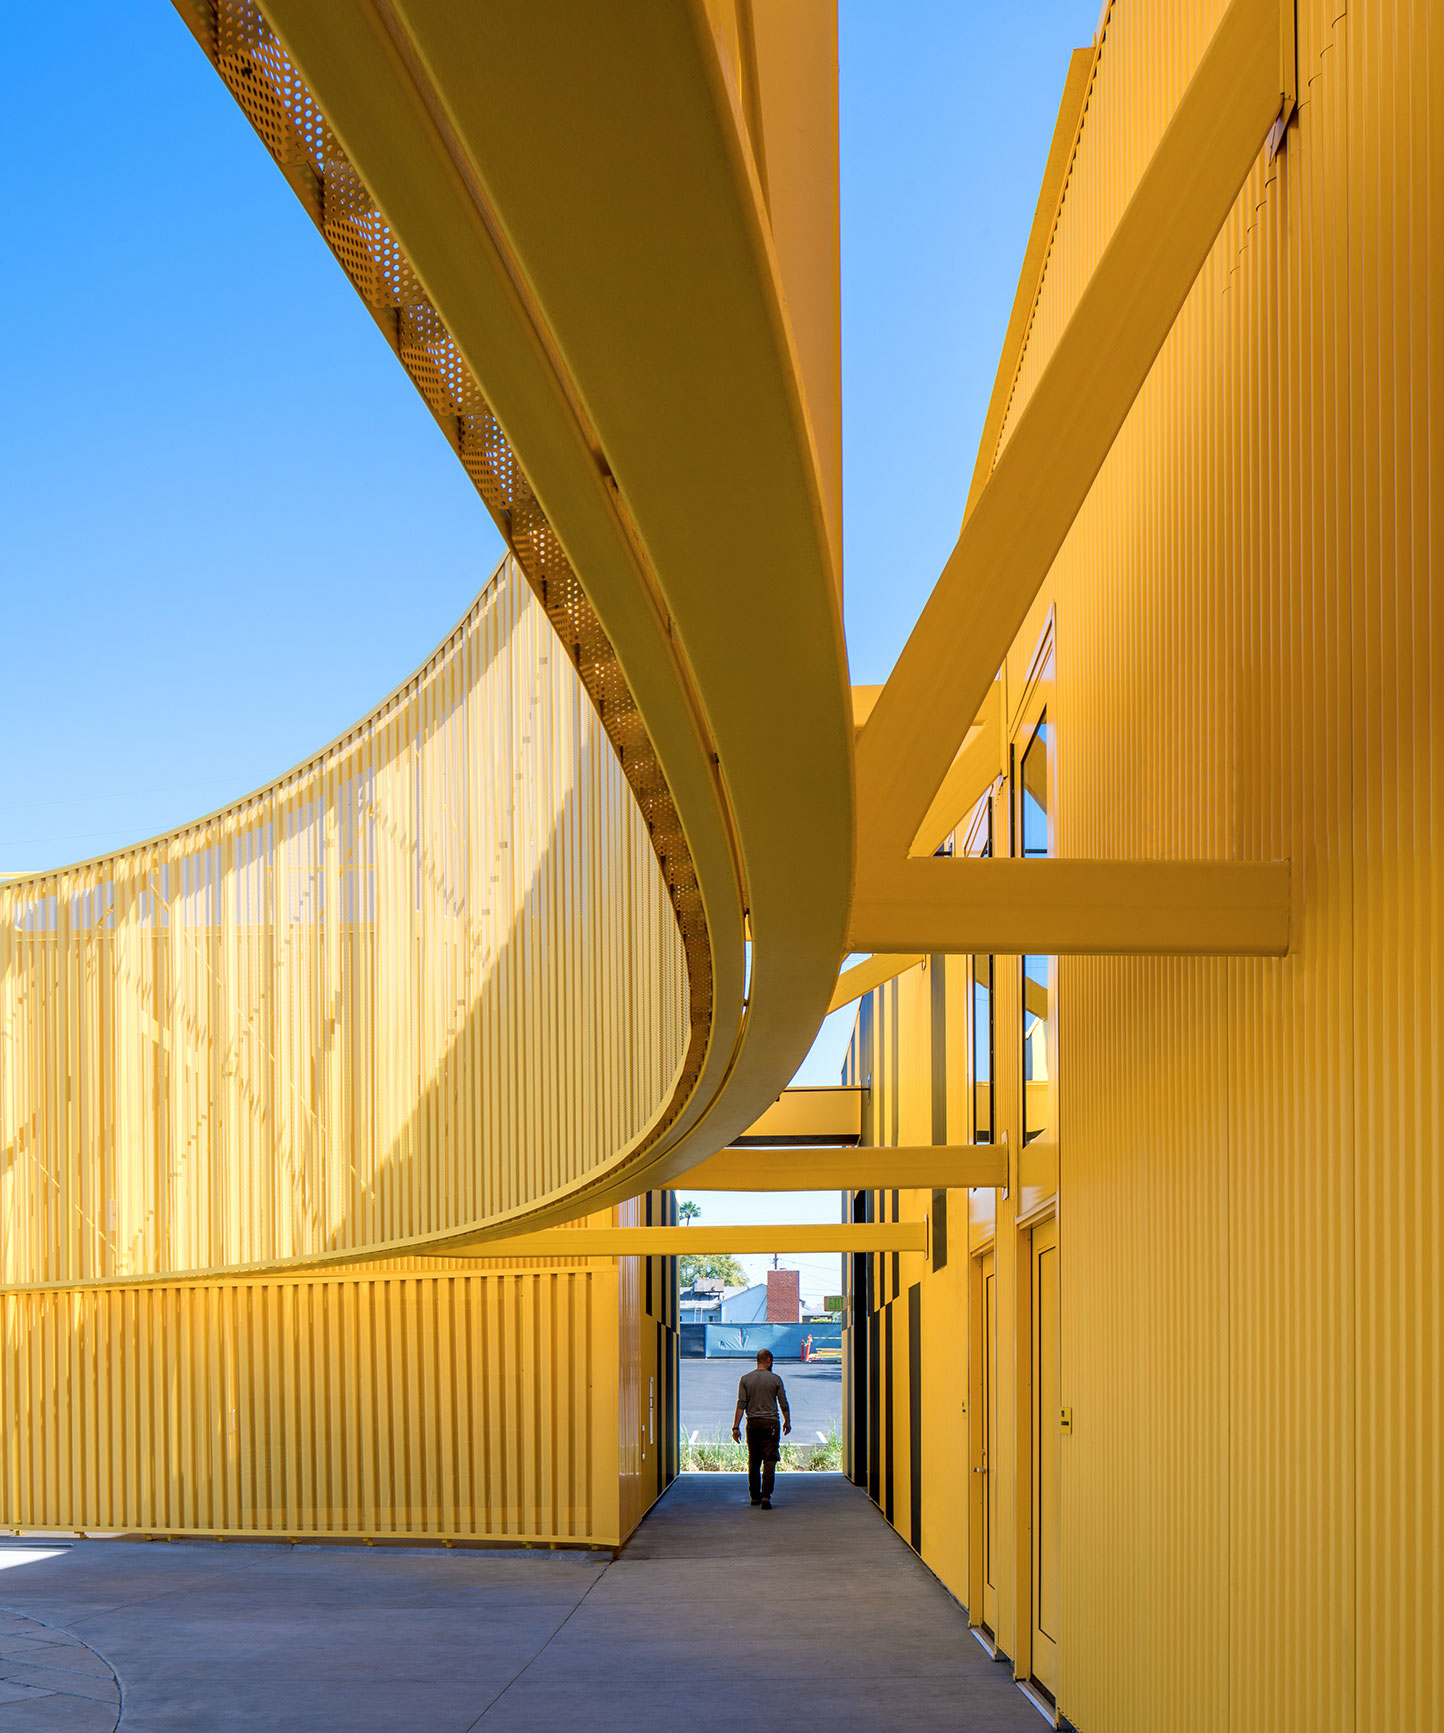 brooks + scarpa designs curved yellow charter school in south los angeles